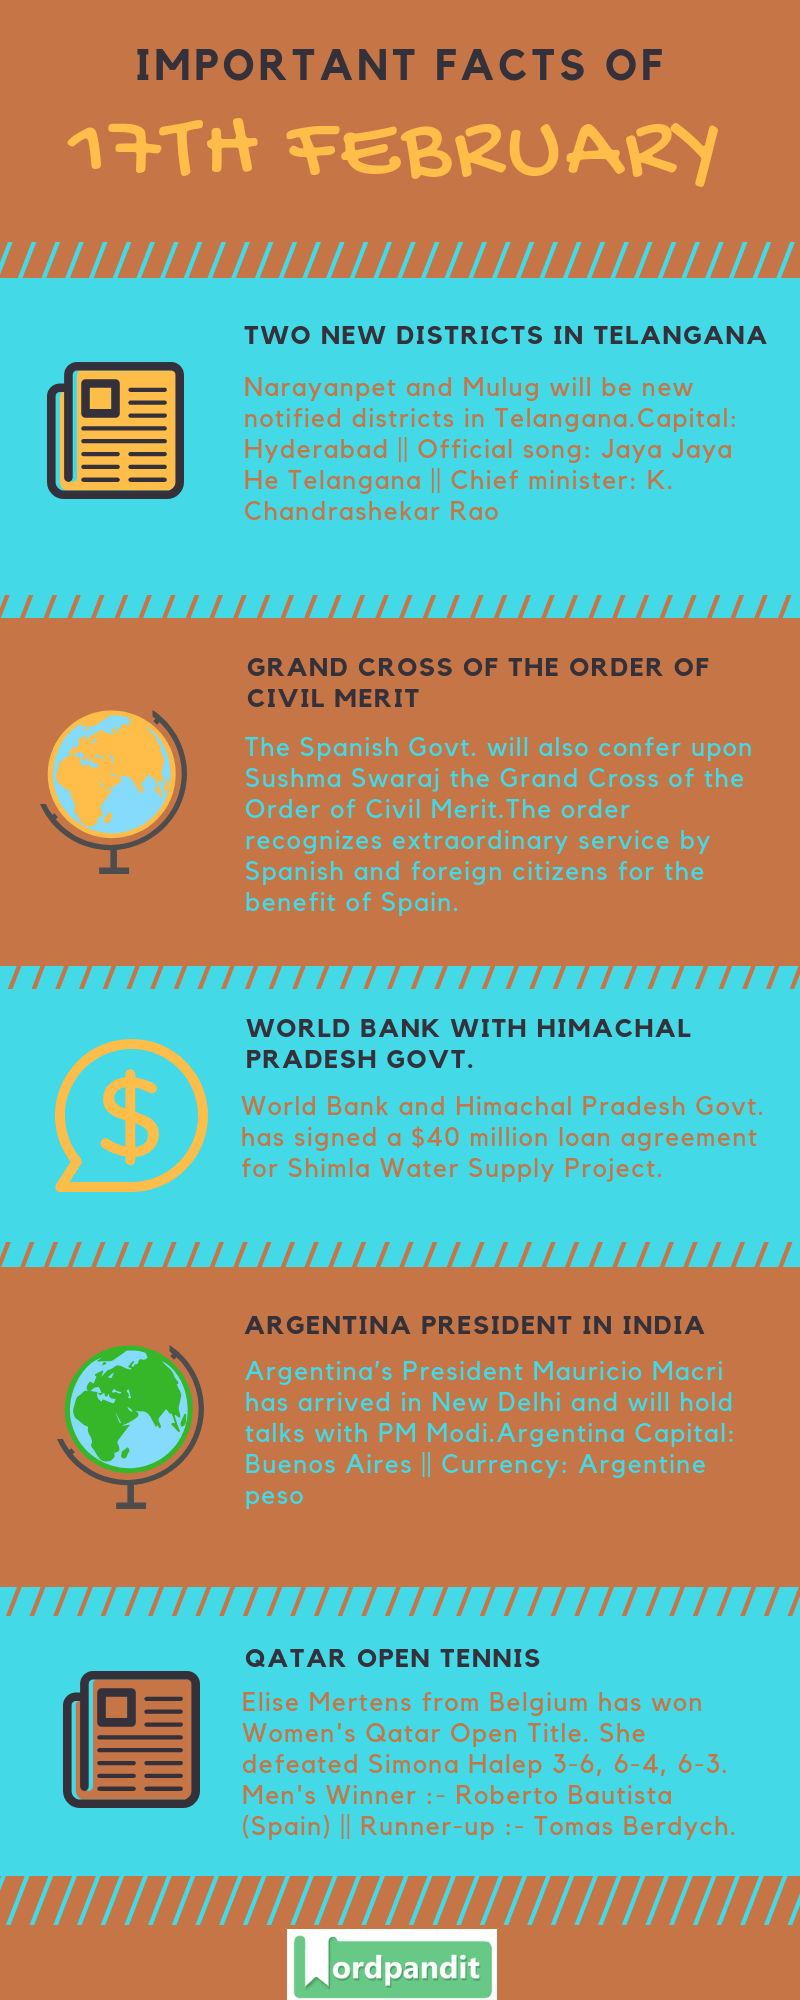 Daily Current Affairs 17 February 2019 Current Affairs Quiz 17 February 2019 Current Affairs Infographic